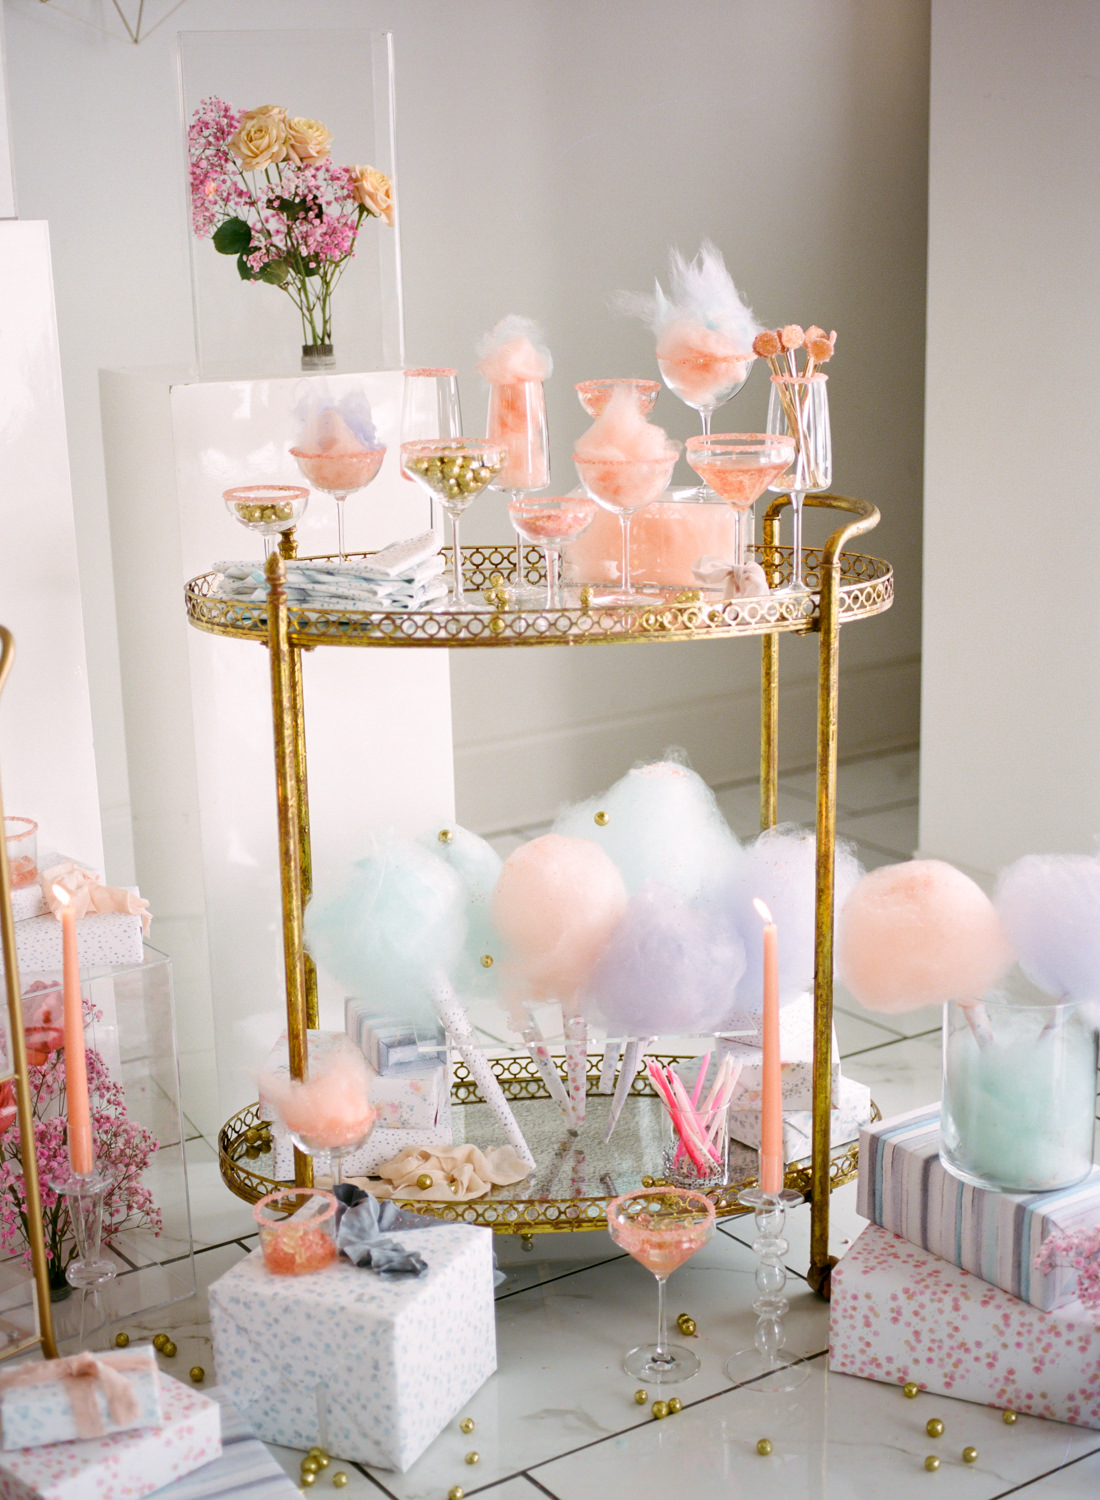 Sara Elizabeth Weddings, Lo in London, cotton candy and presents on Crate and Barrel bar cart, St. Louis wedding photographer